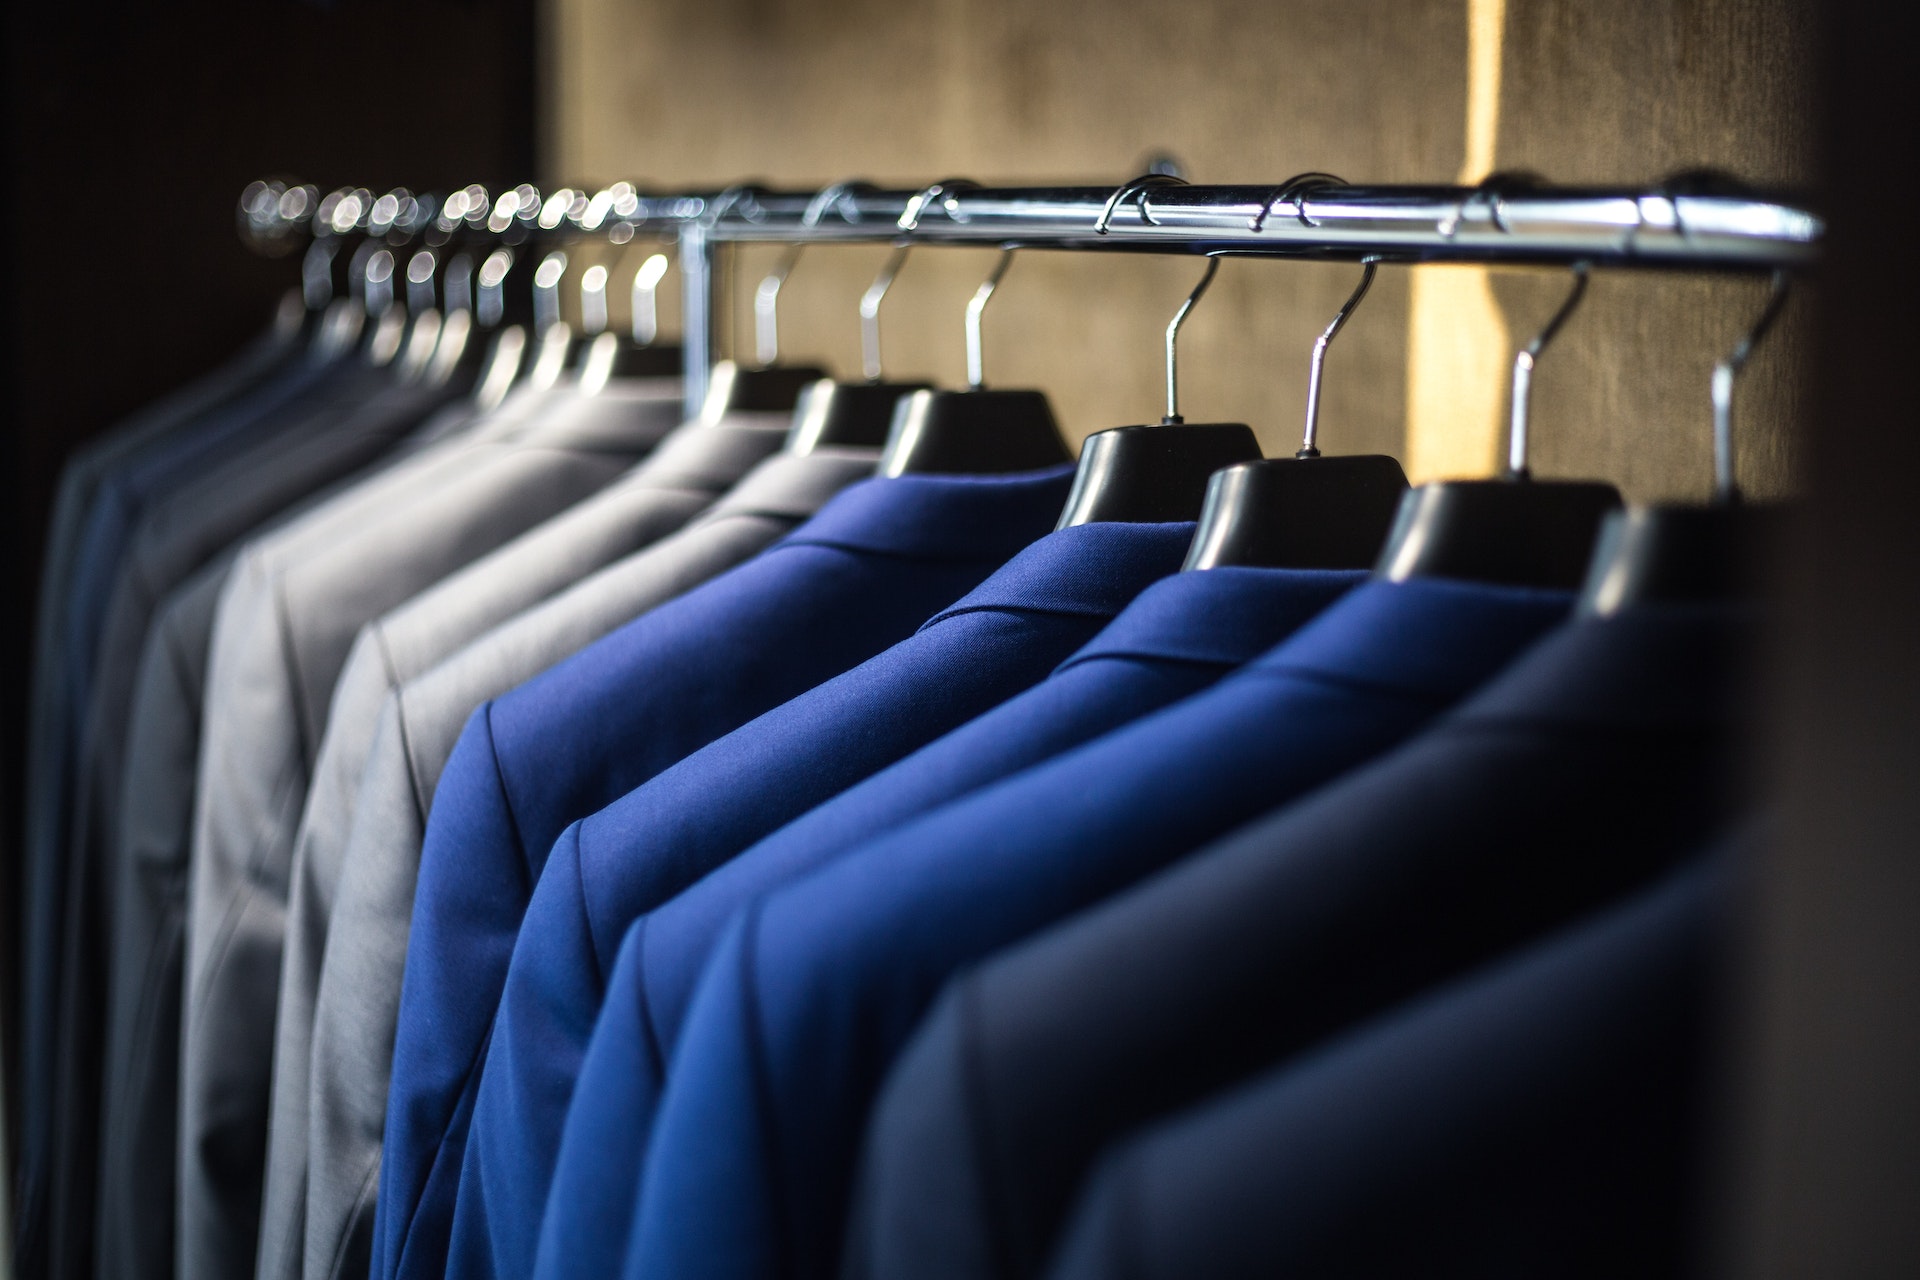 How To Start A Dry Cleaning Business from Scratch – 6 Steps